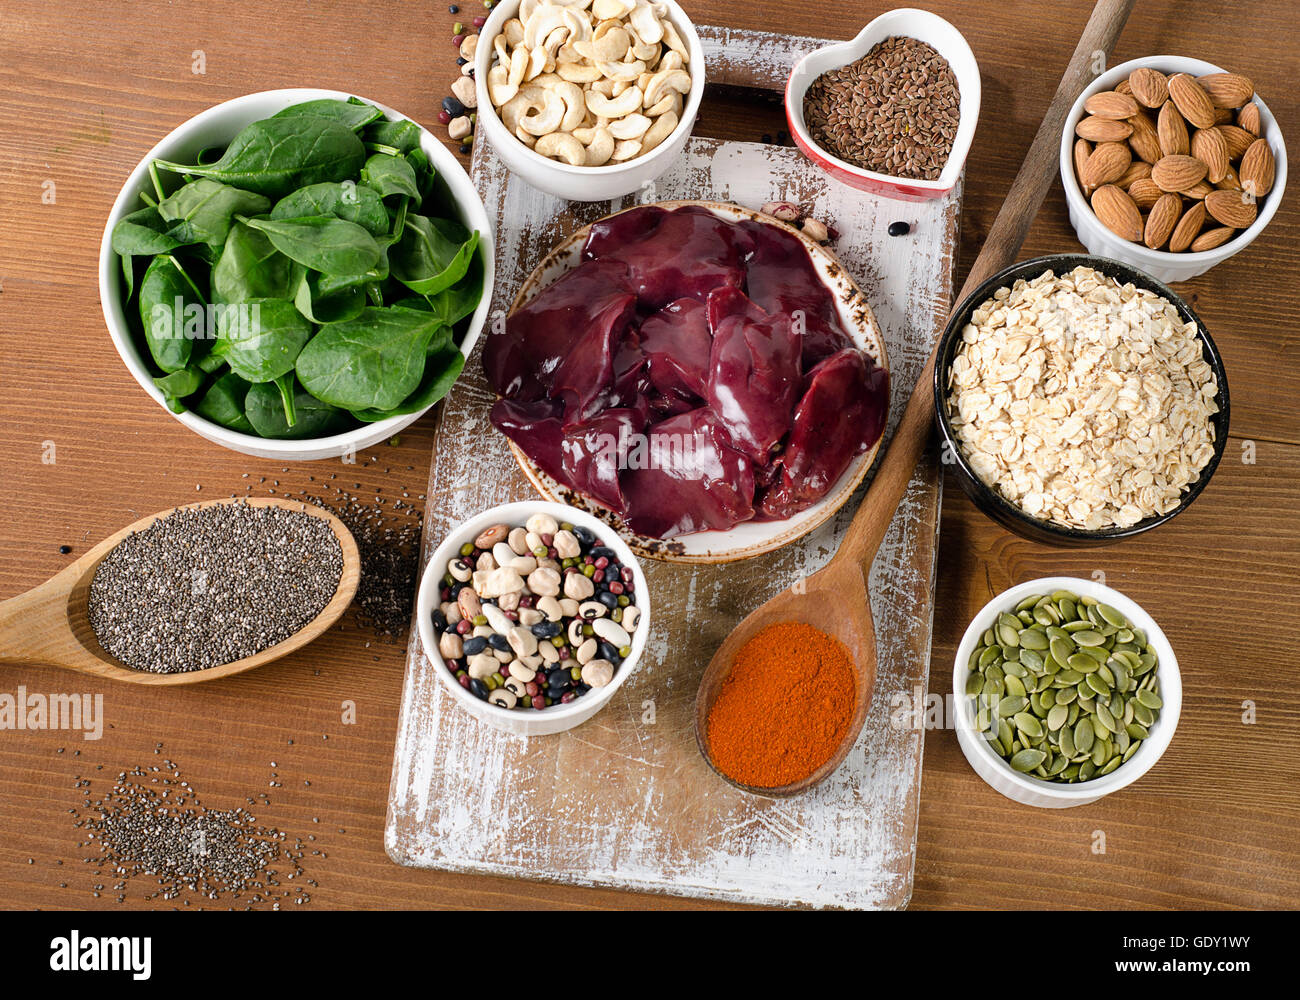 Manganese rich foods. Healthy eating. Top view Stock Photo